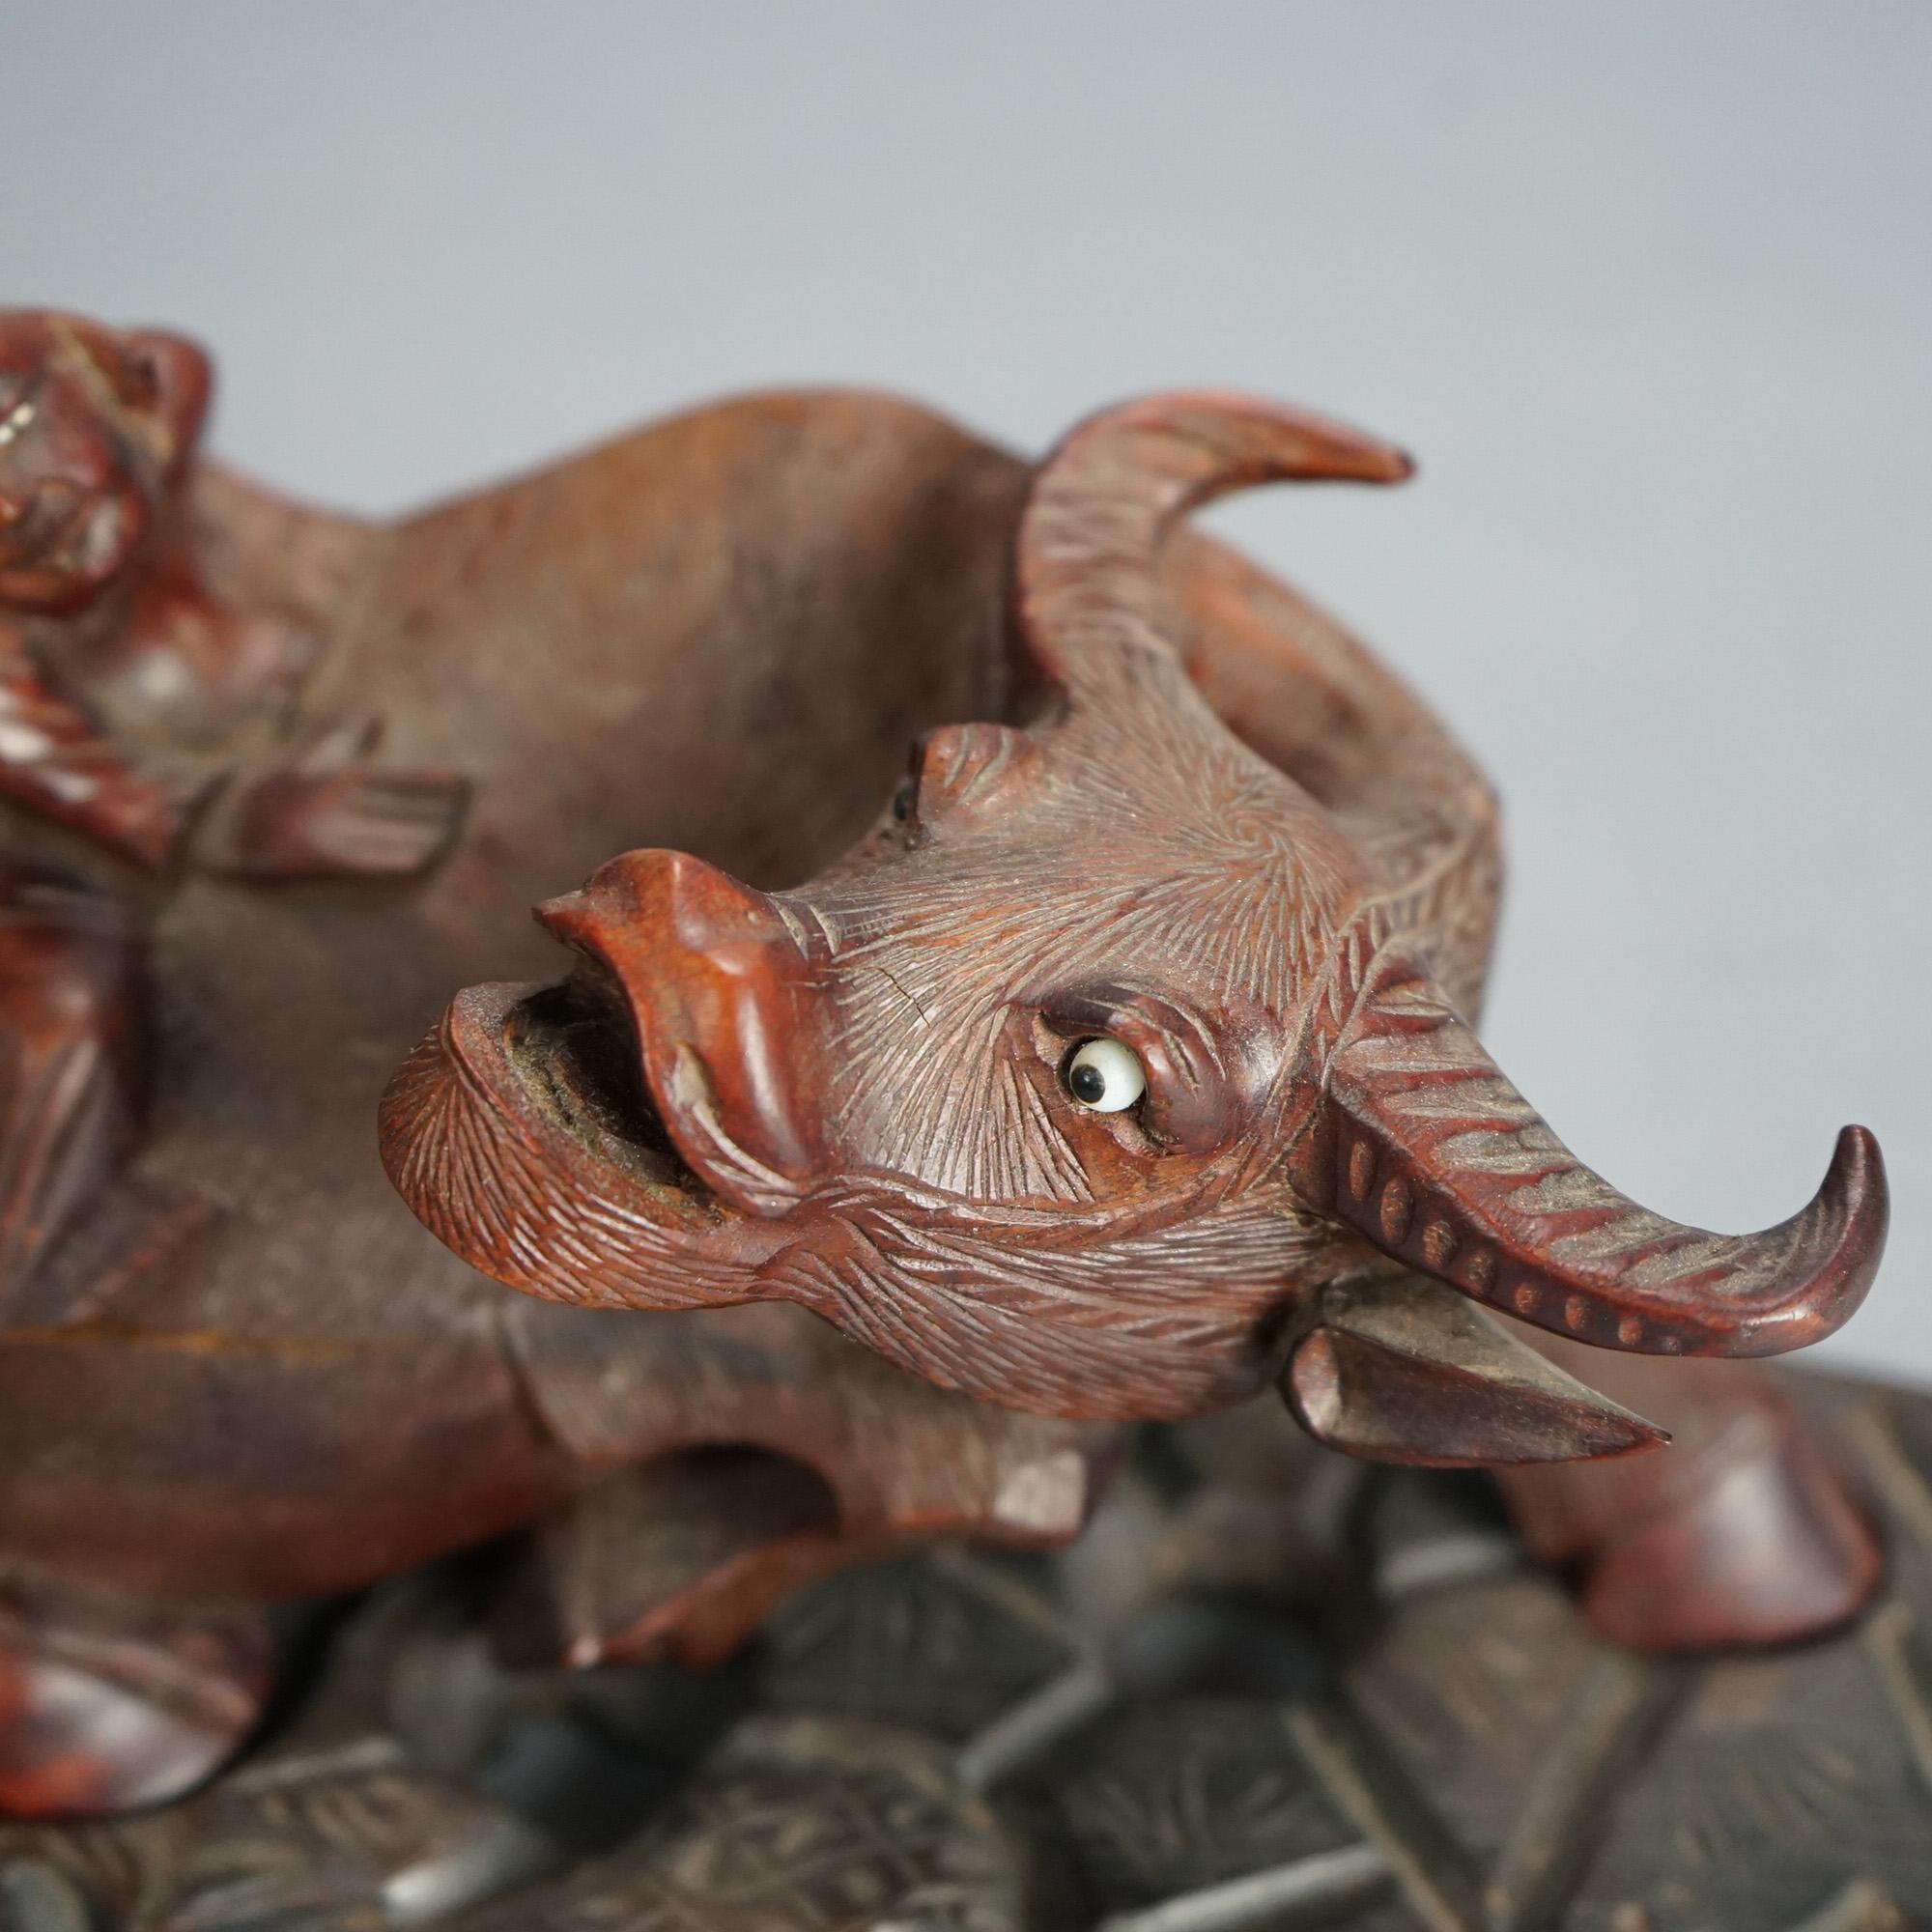 20th Century Antique Chinese Carved Wood Sculpture of Water Buffalo with Figures C1920 For Sale